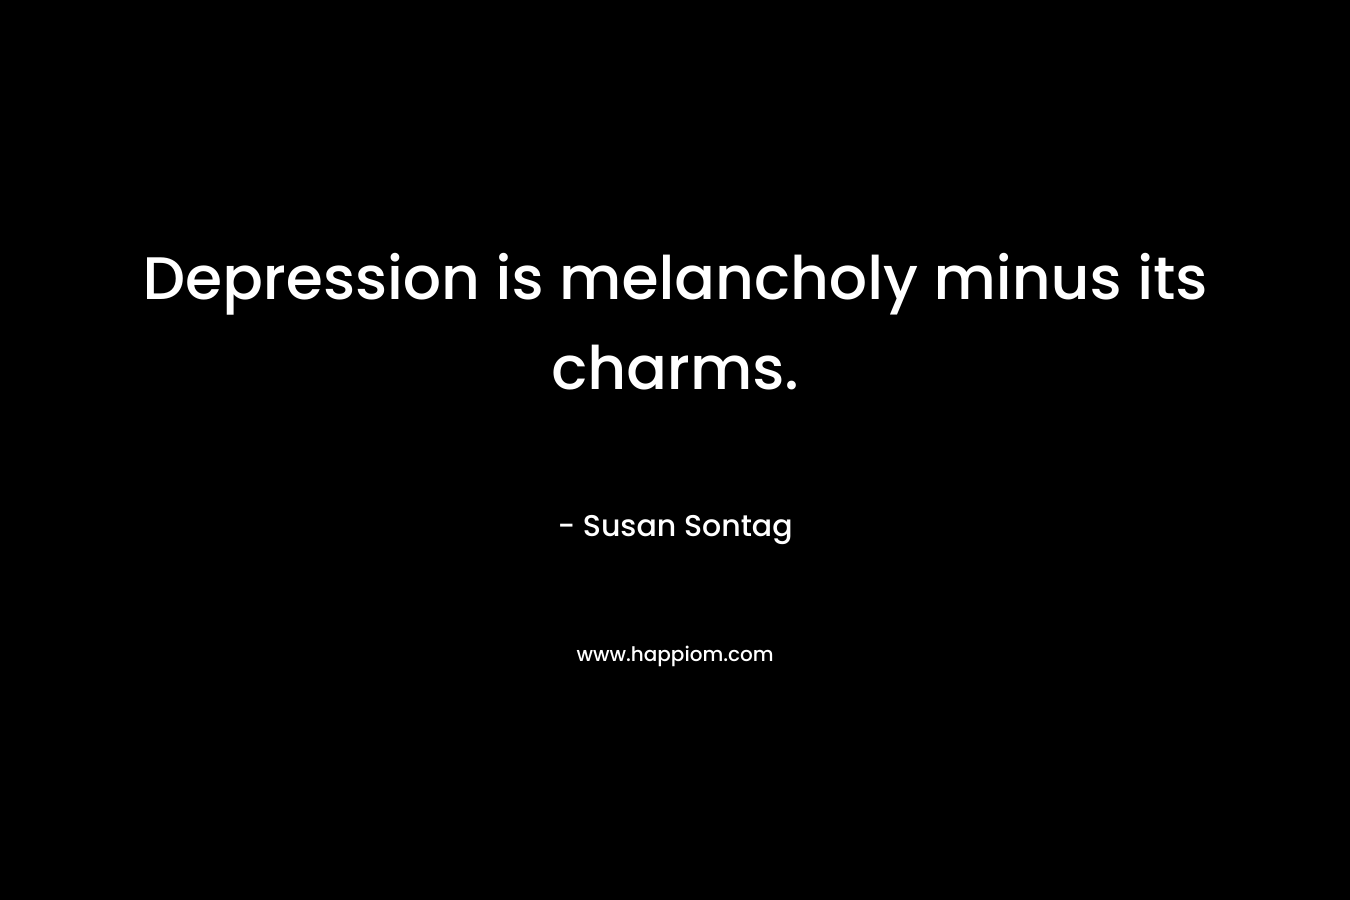 Depression is melancholy minus its charms.